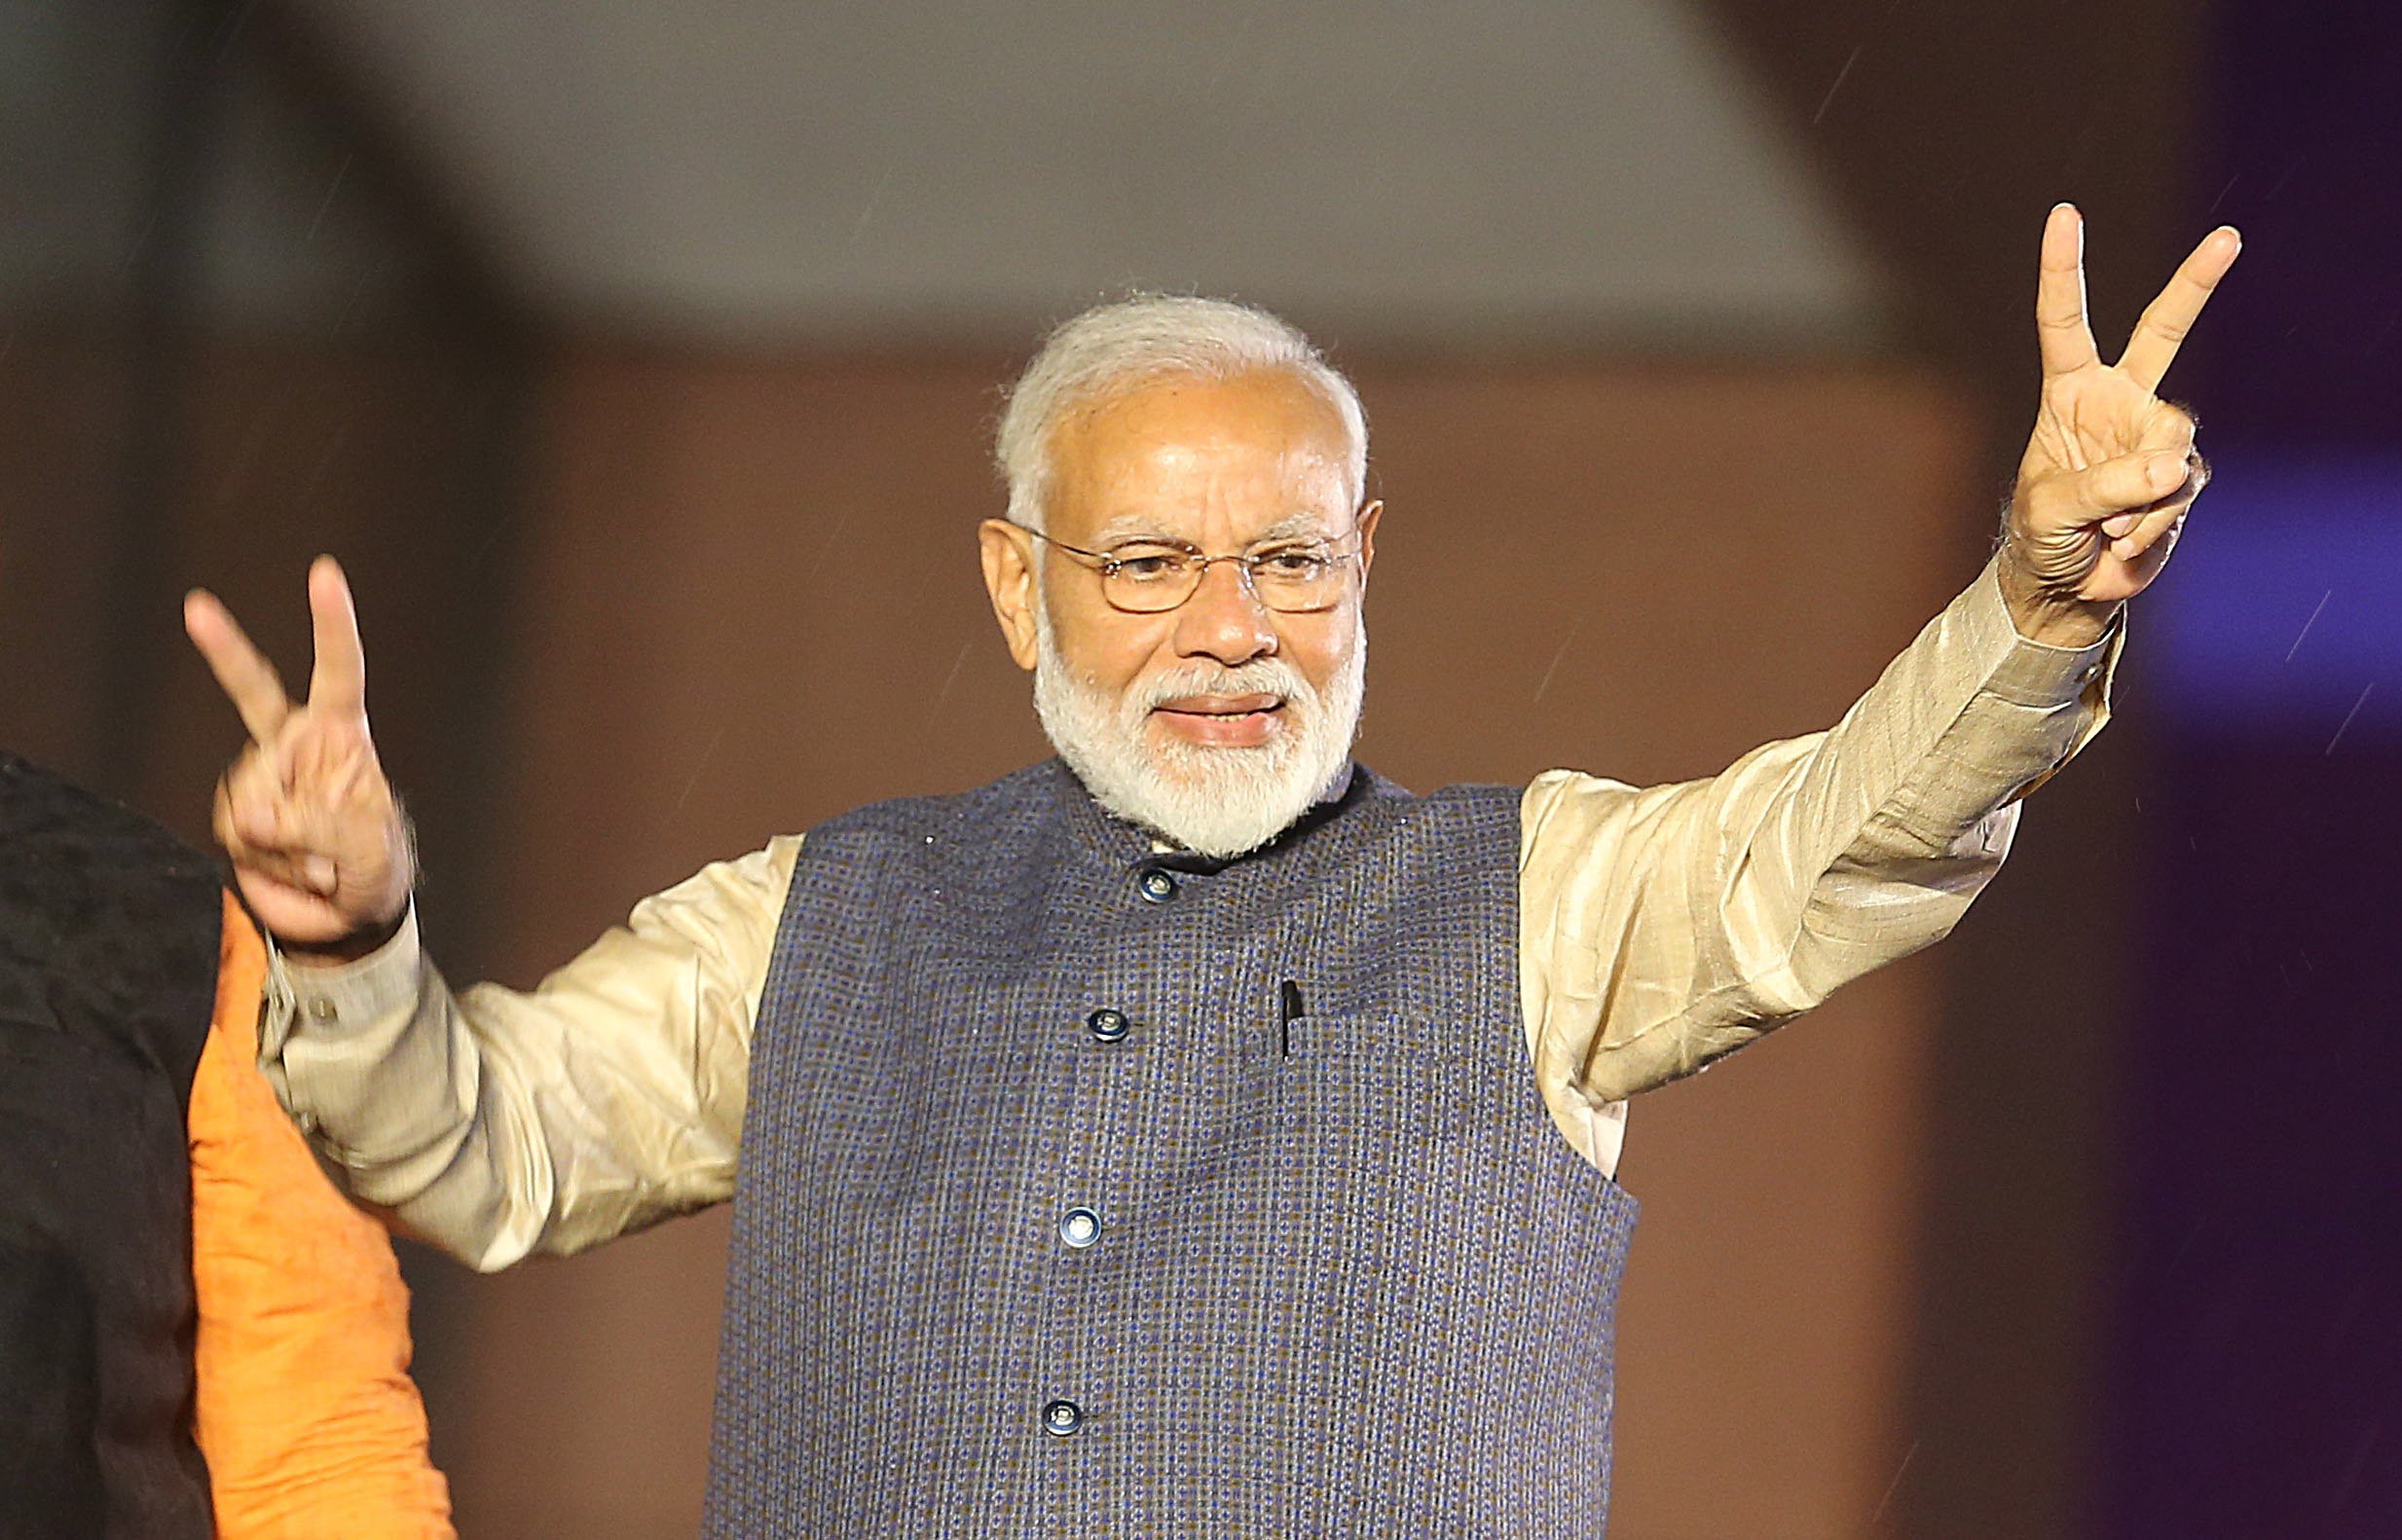 PM Narendra Modi says his BJP has crossed the majority in the parliamentary elections due to end next week. He made the comments in an interview with The Economic Times. Photo: EPA-EFE